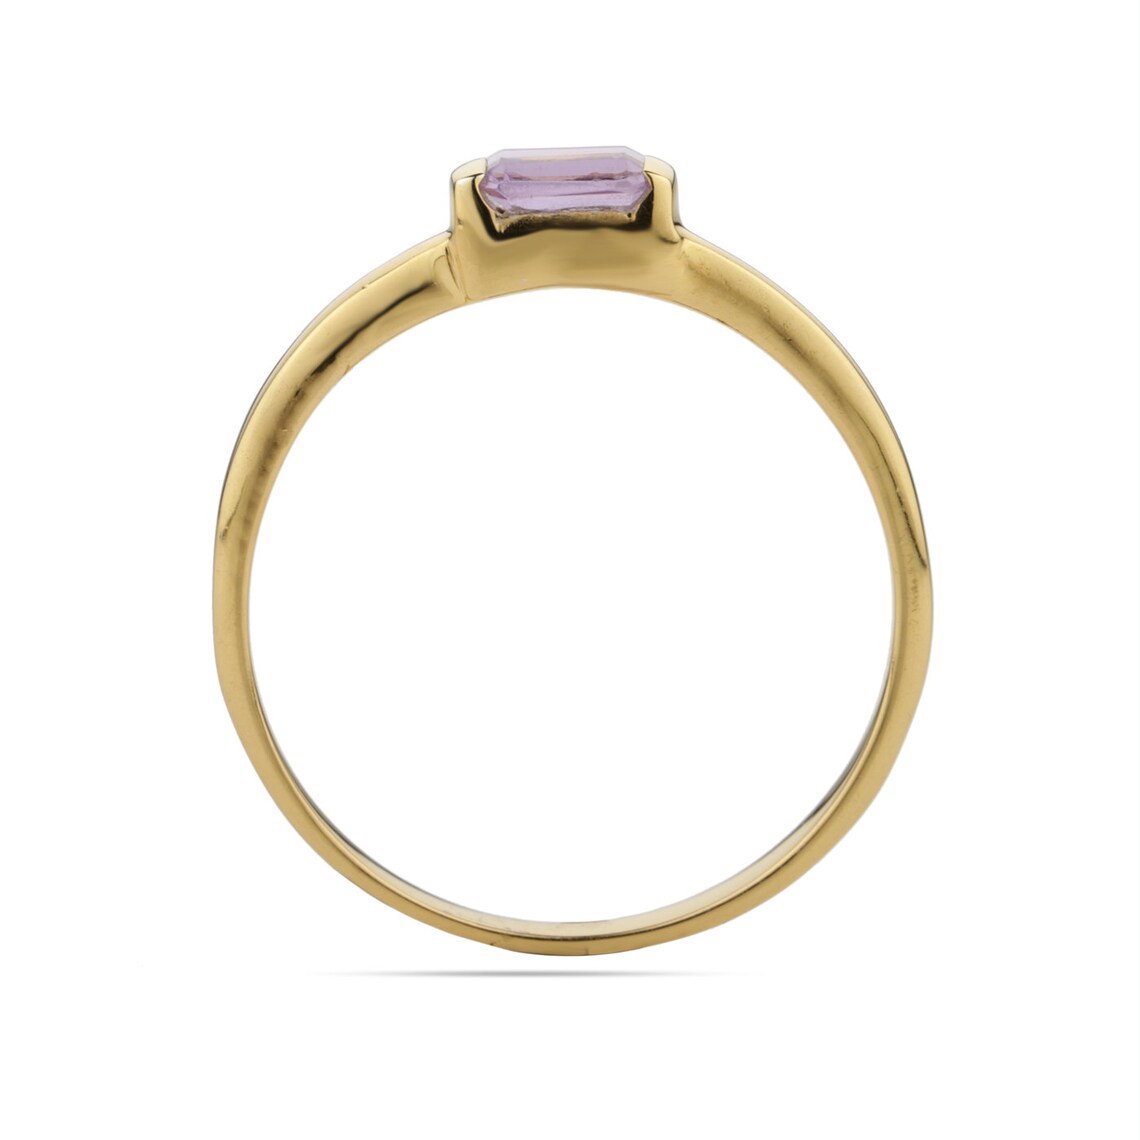 Gold Plated - Sterling 925 Silver Amethyst Ring, Natural Amethyst February Gemstone, Handmade Vermeil Gold Stacking Ring, Dainty Minimalist Women's Gifting Jewelry